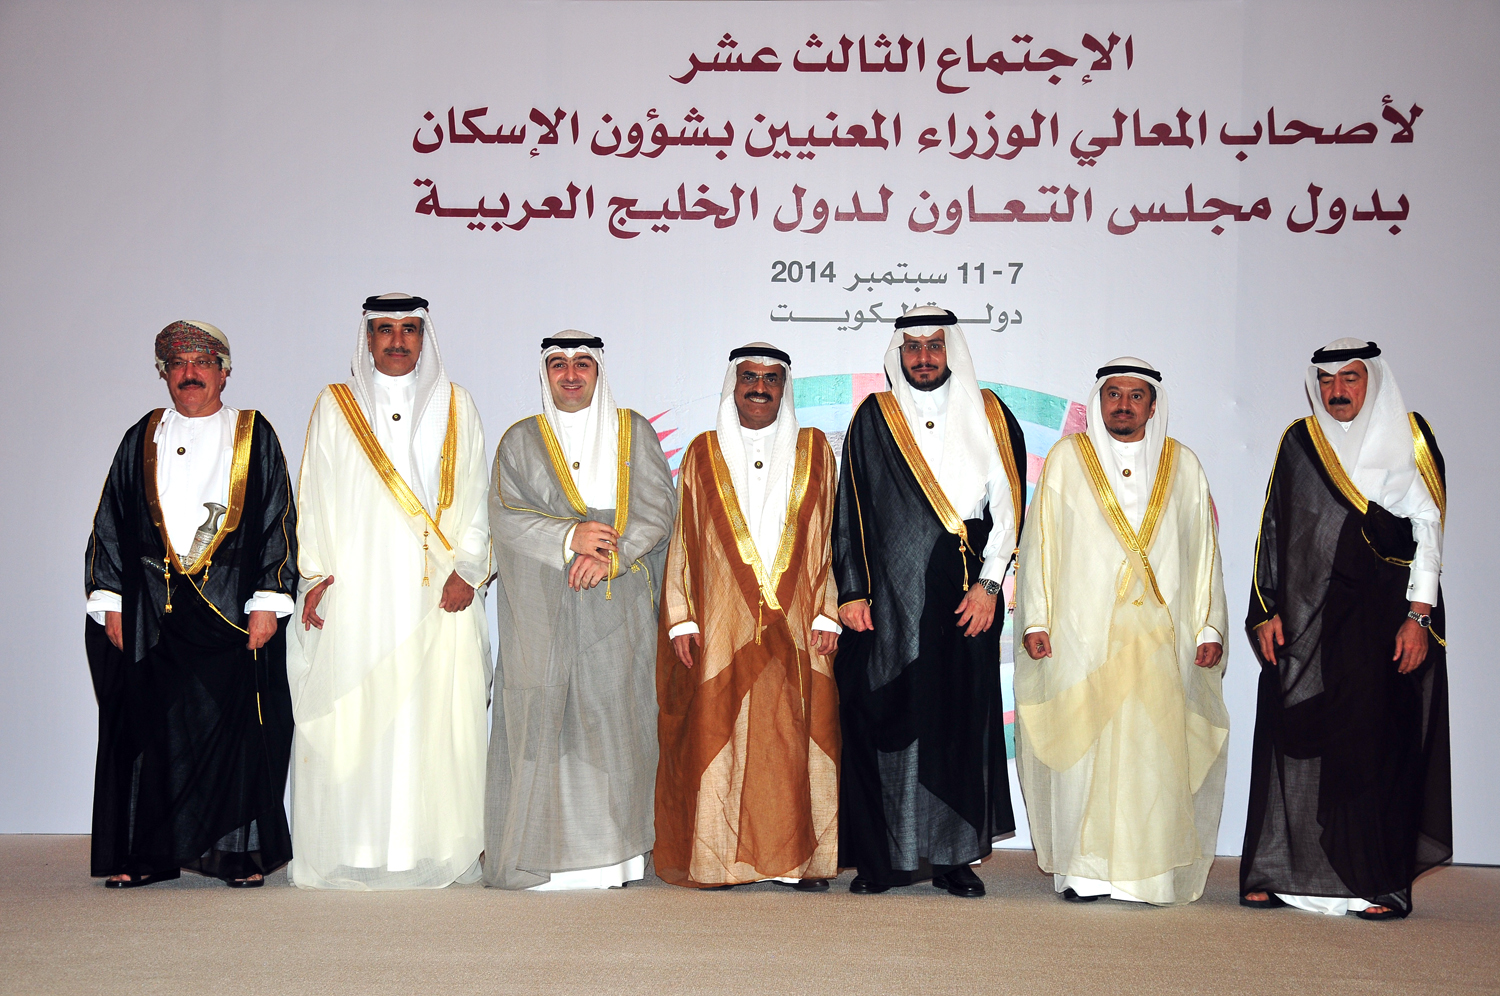 Gulf Cooperation Council (GCC) housing ministers conclude The 13th meeting